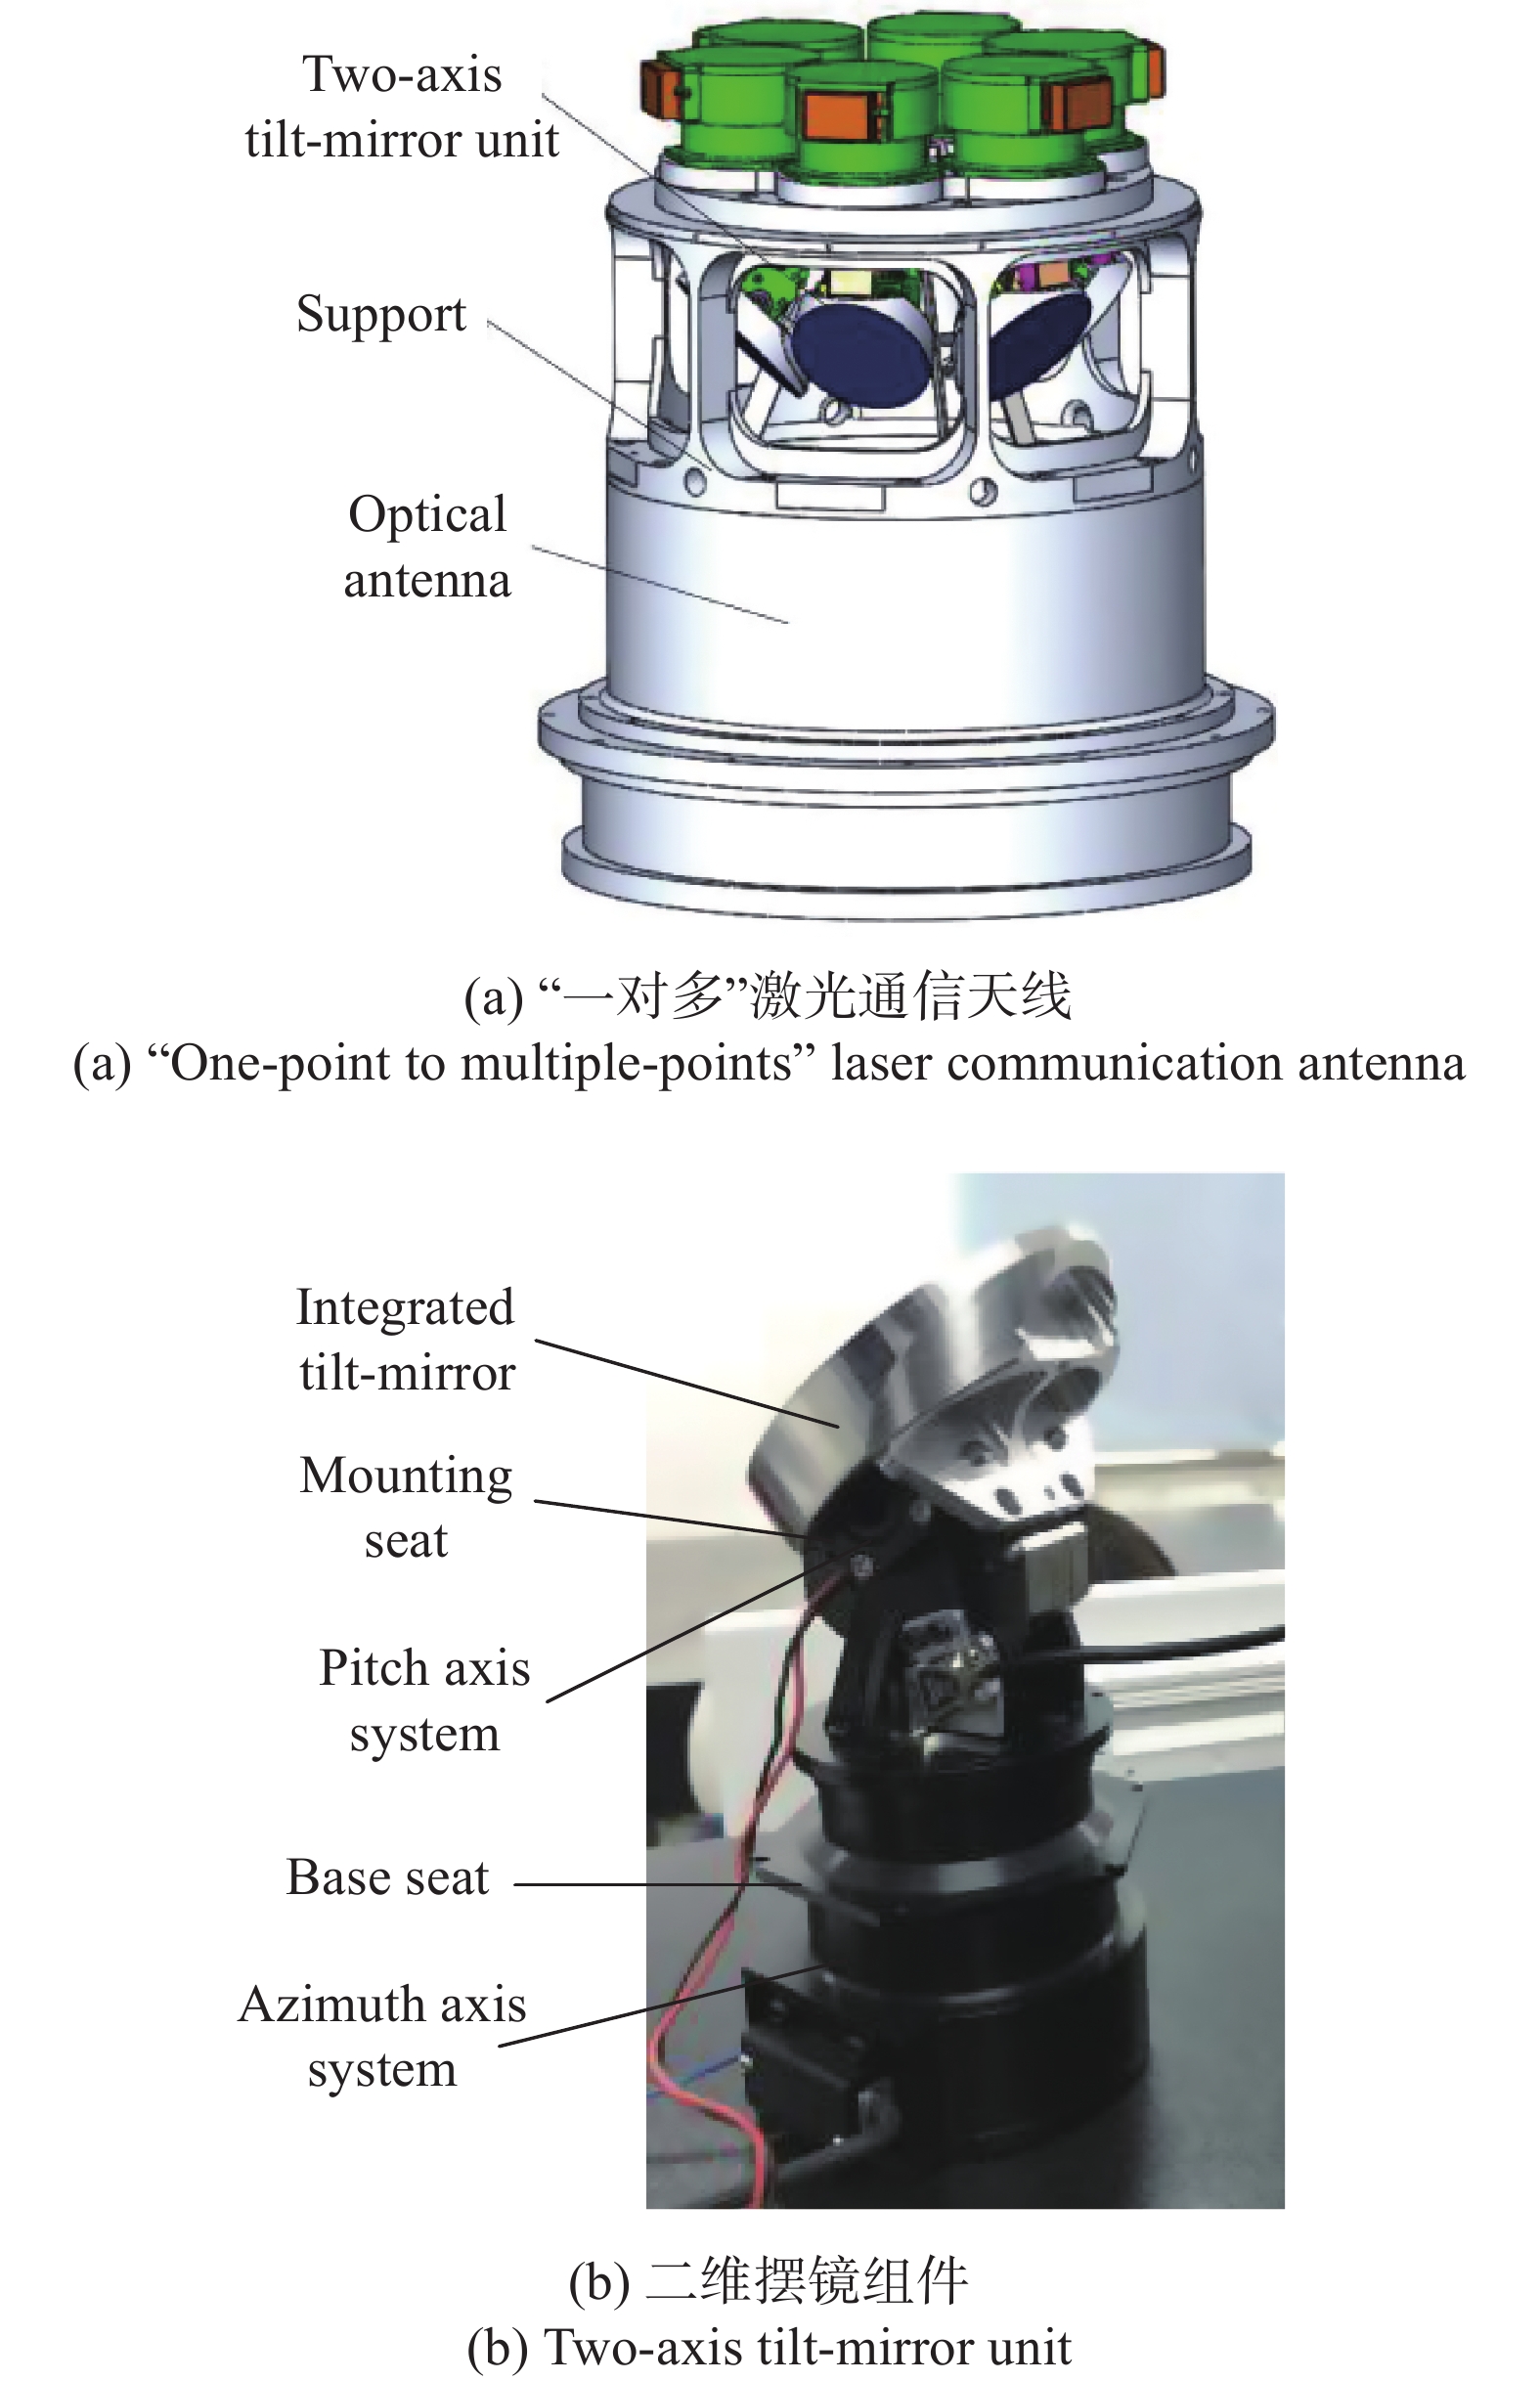 "One-point to multiple-points" laser communication antenna and two-axis tilt-mirror unit